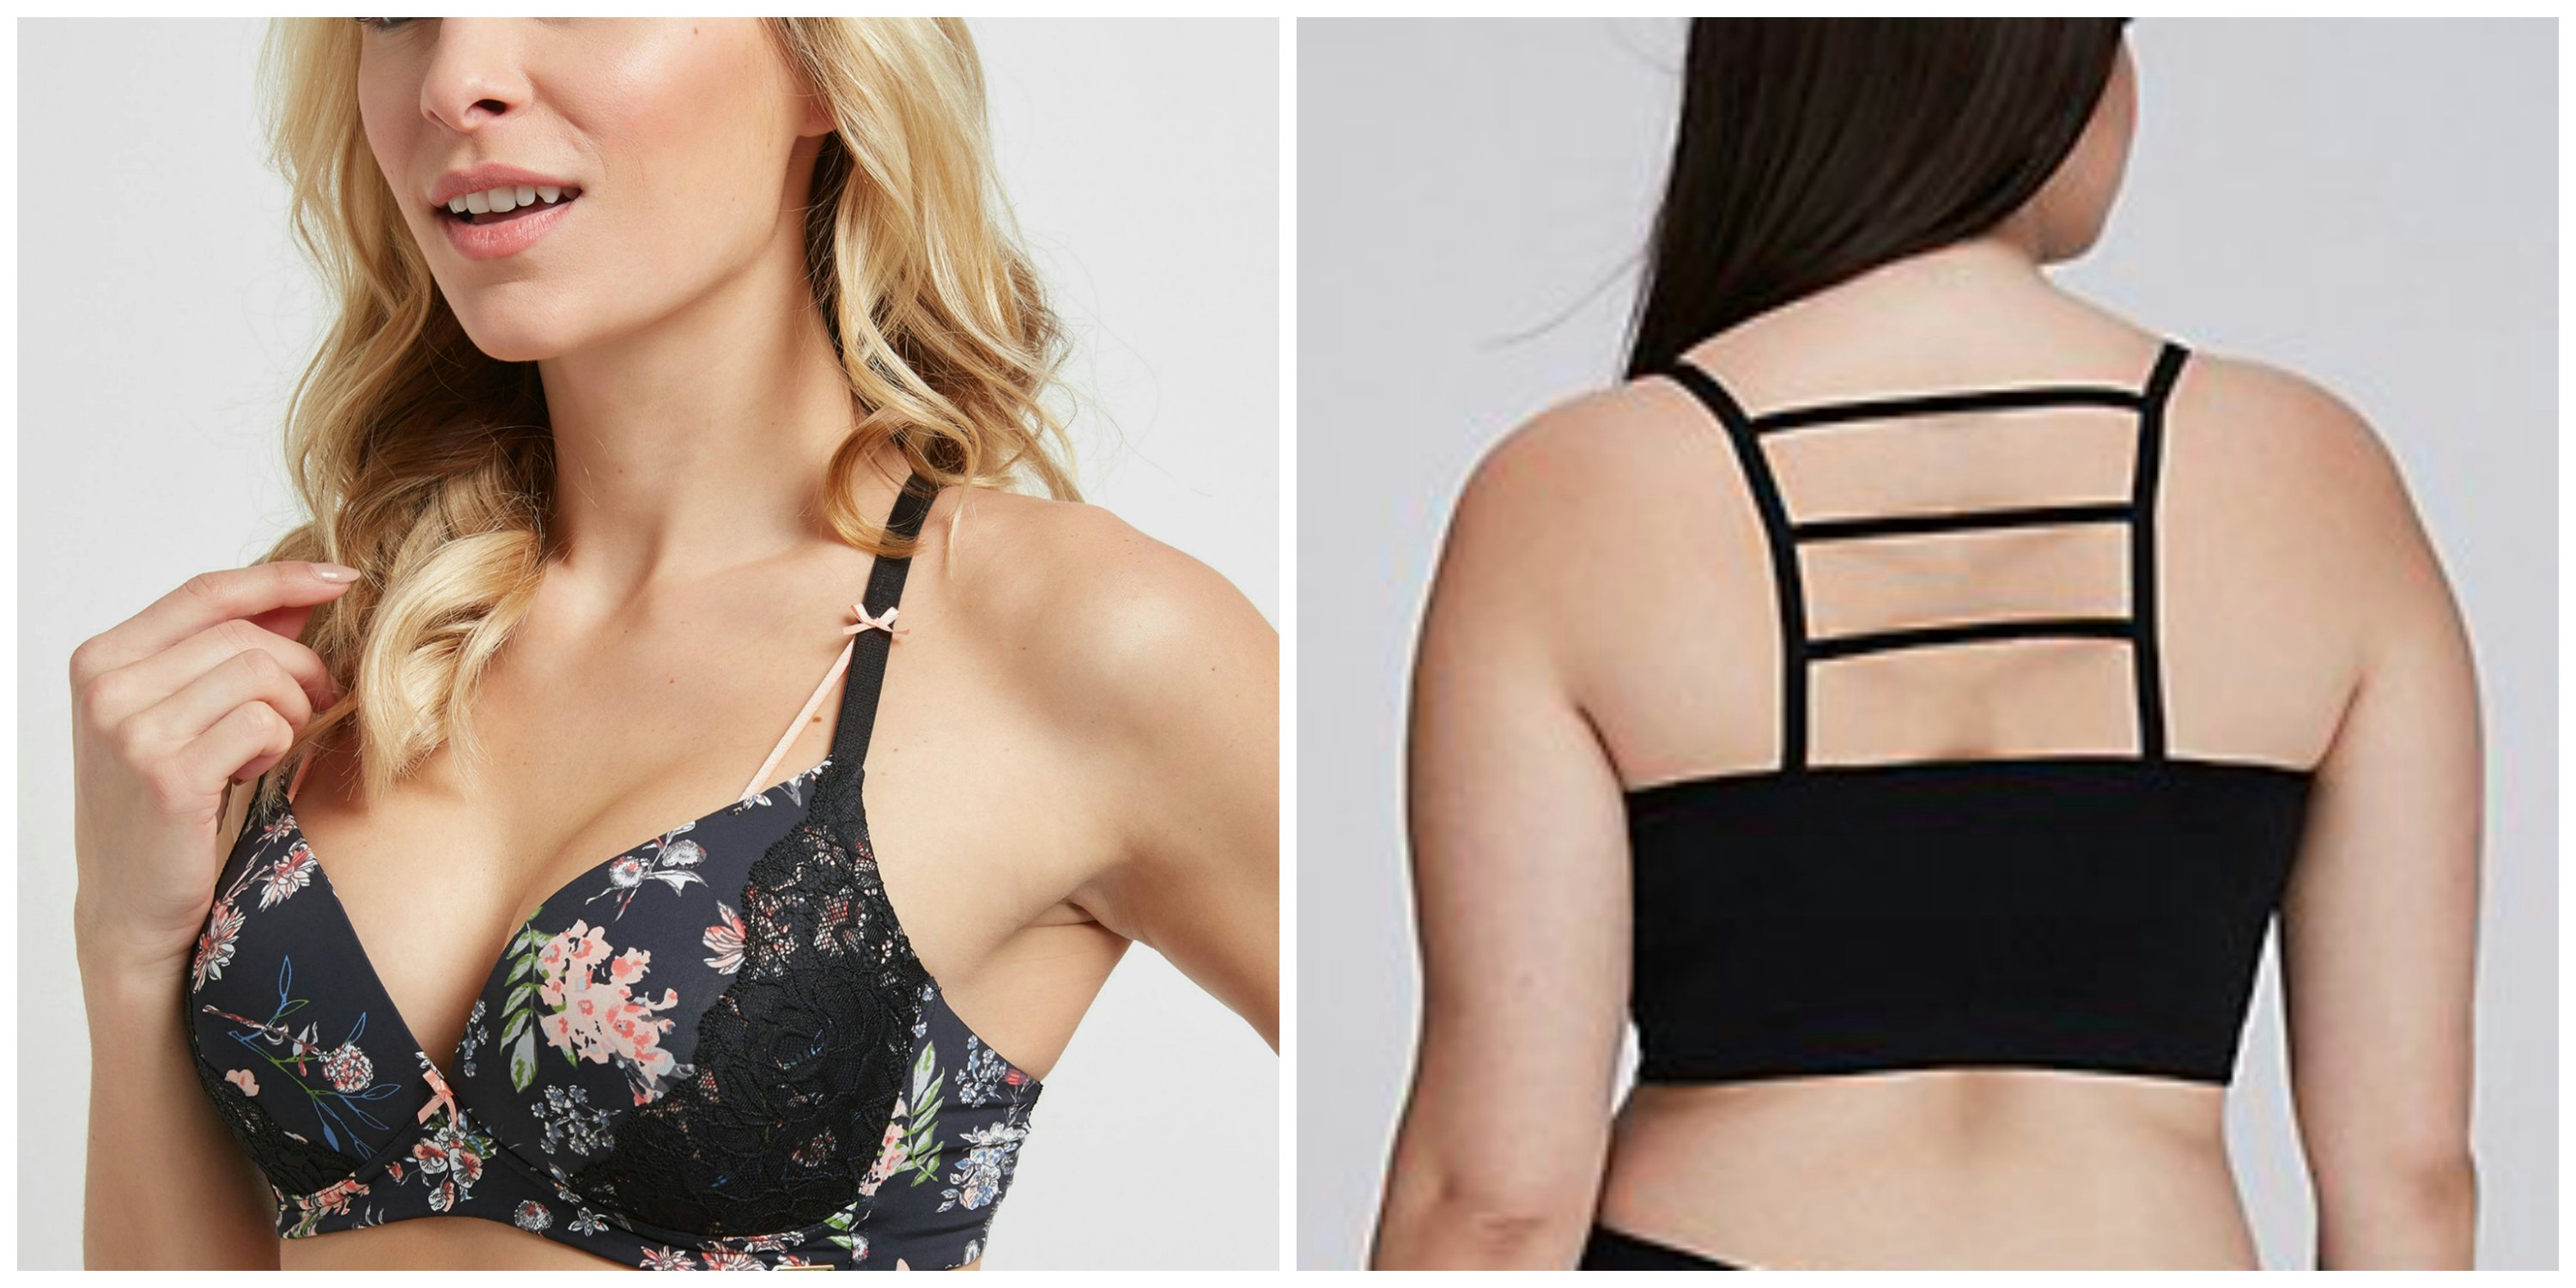 Bouncing Black Boobs Bra - The 12 Best Bras Without Underwire For Large Breasts